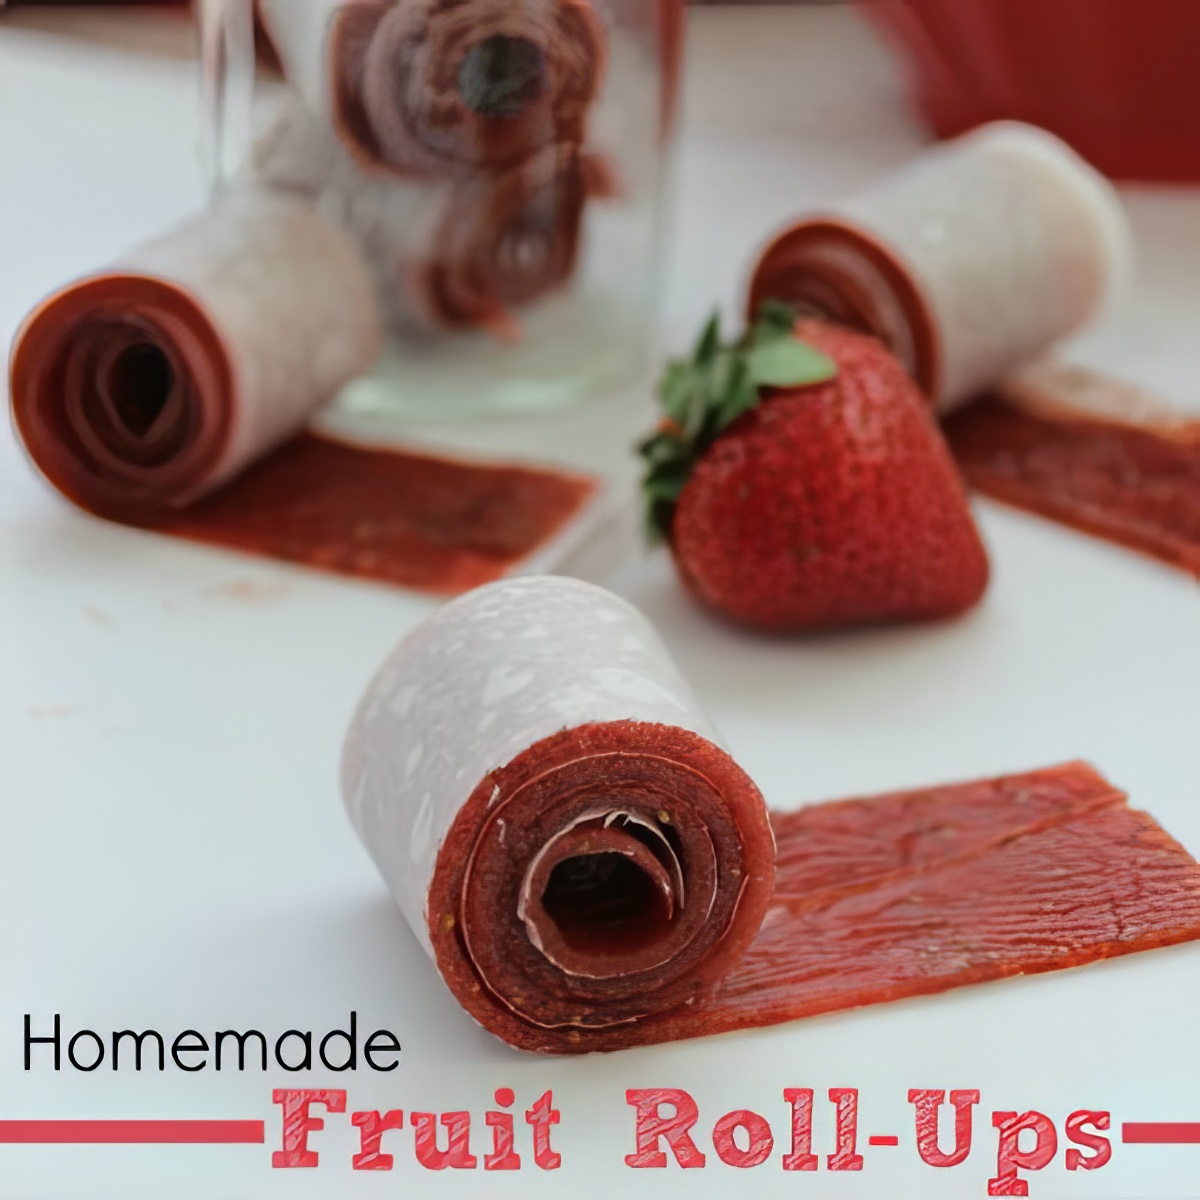 Homemade-Fruit-Roll-Ups snack lunchbox treats for kids